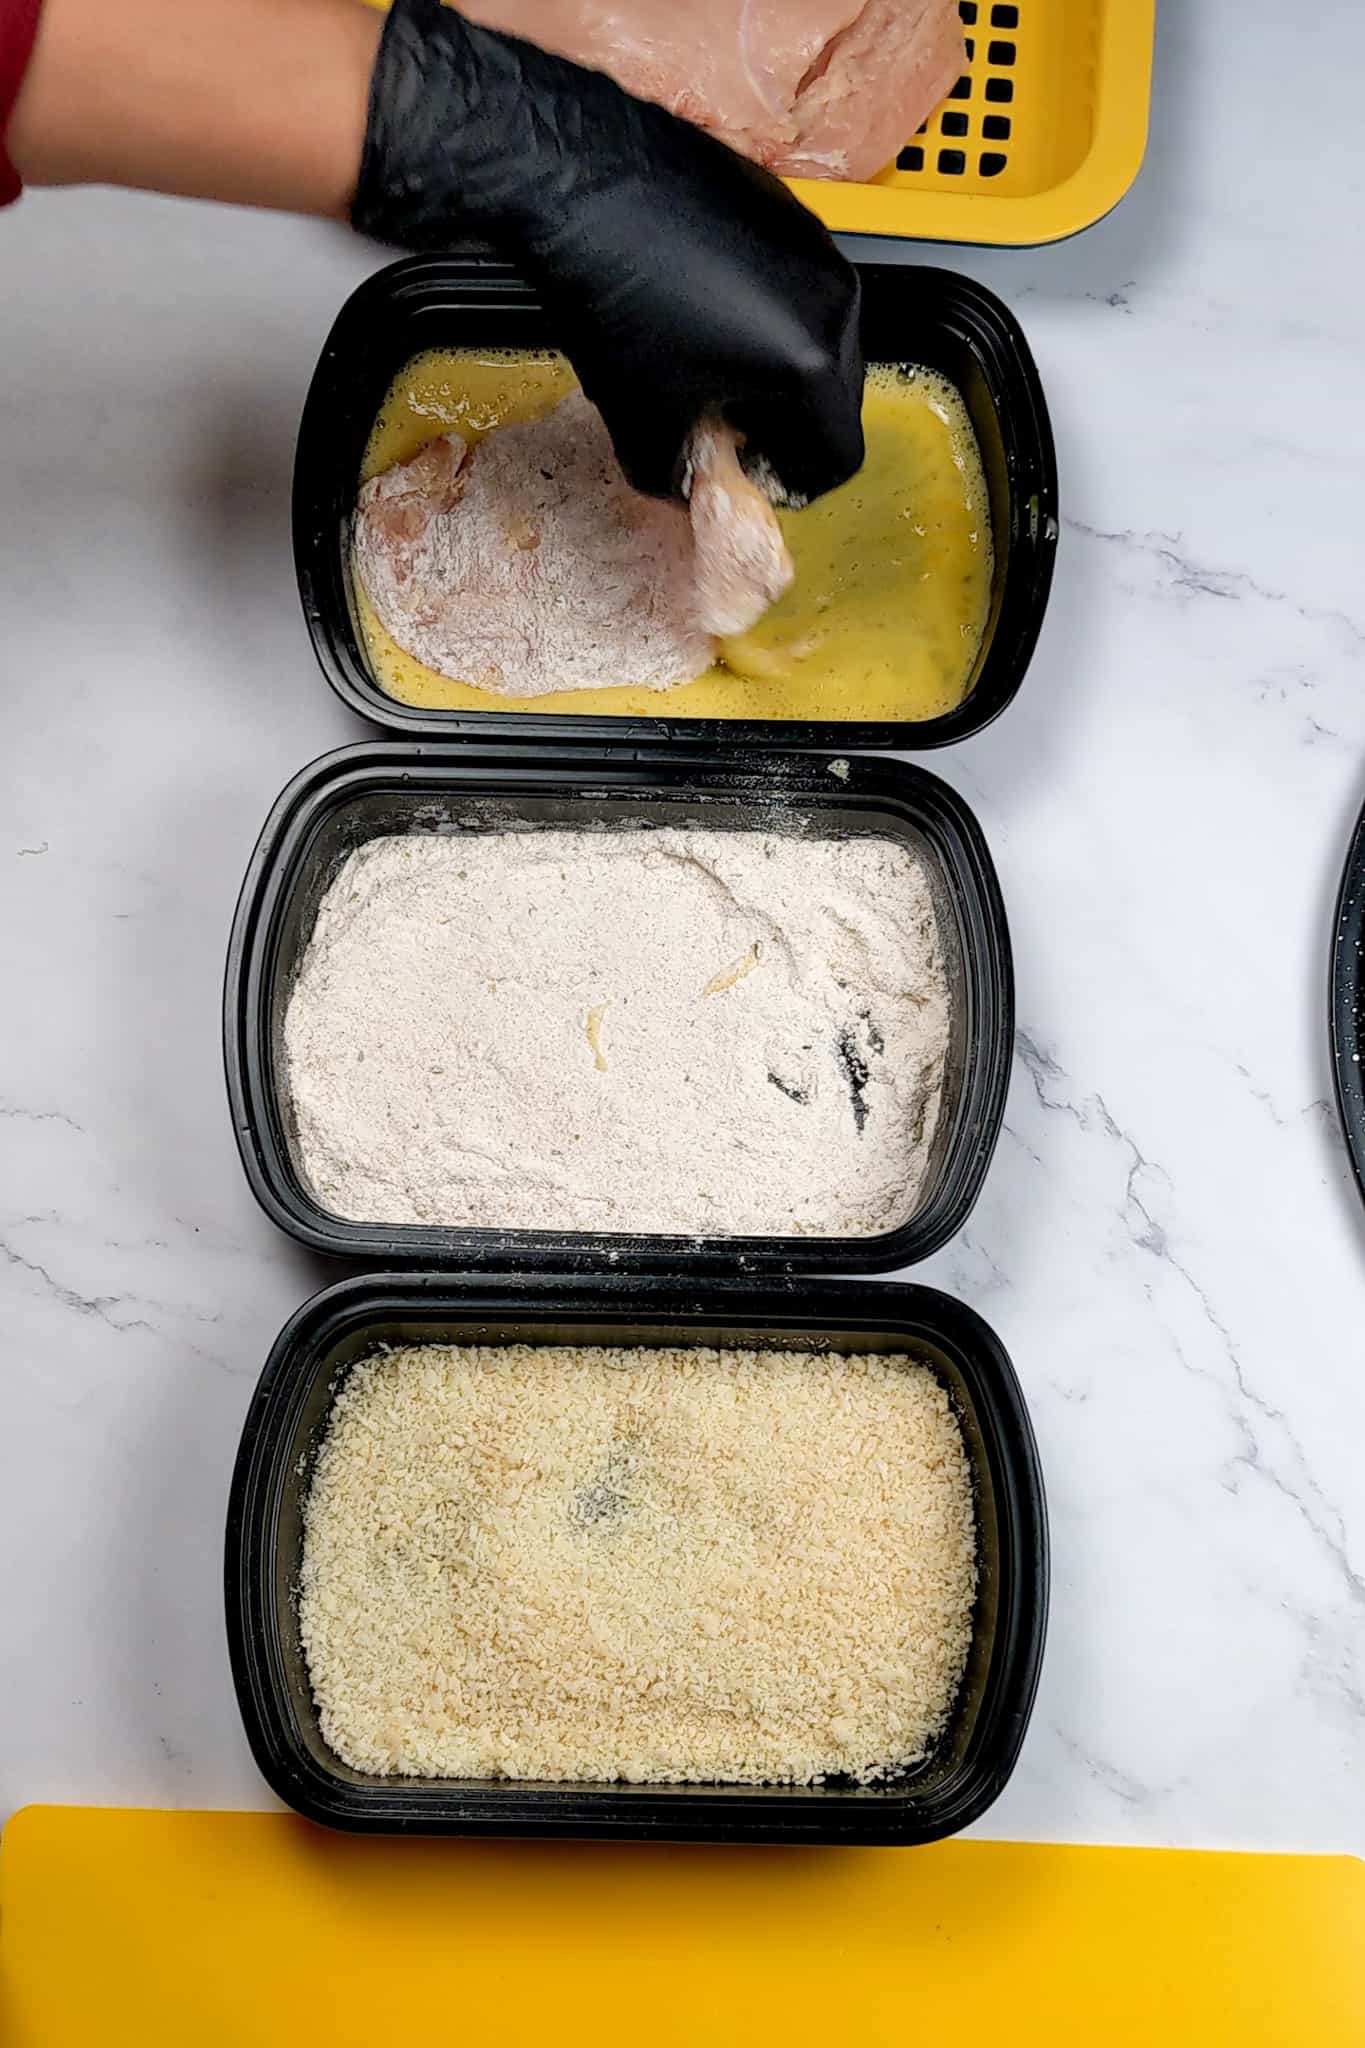 flour coasted chicken cutlet being dipped in a shallow pan of egg wash assembled next to other shallow trays, one with flour and the other with bread crumbs